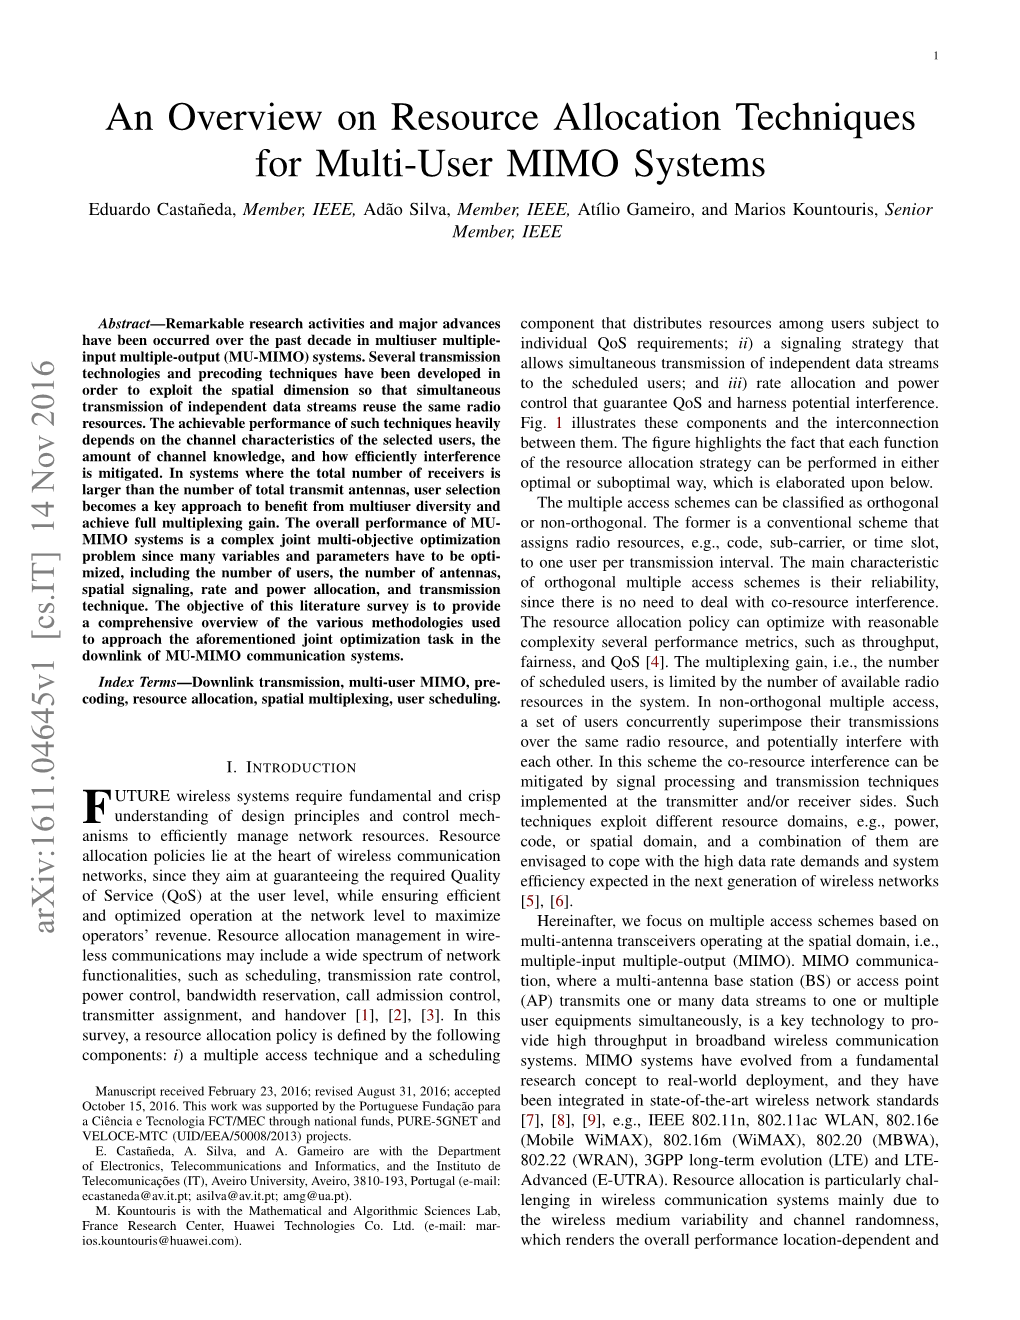 An Overview on Resource Allocation Techniques for Multi-User MIMO Systems